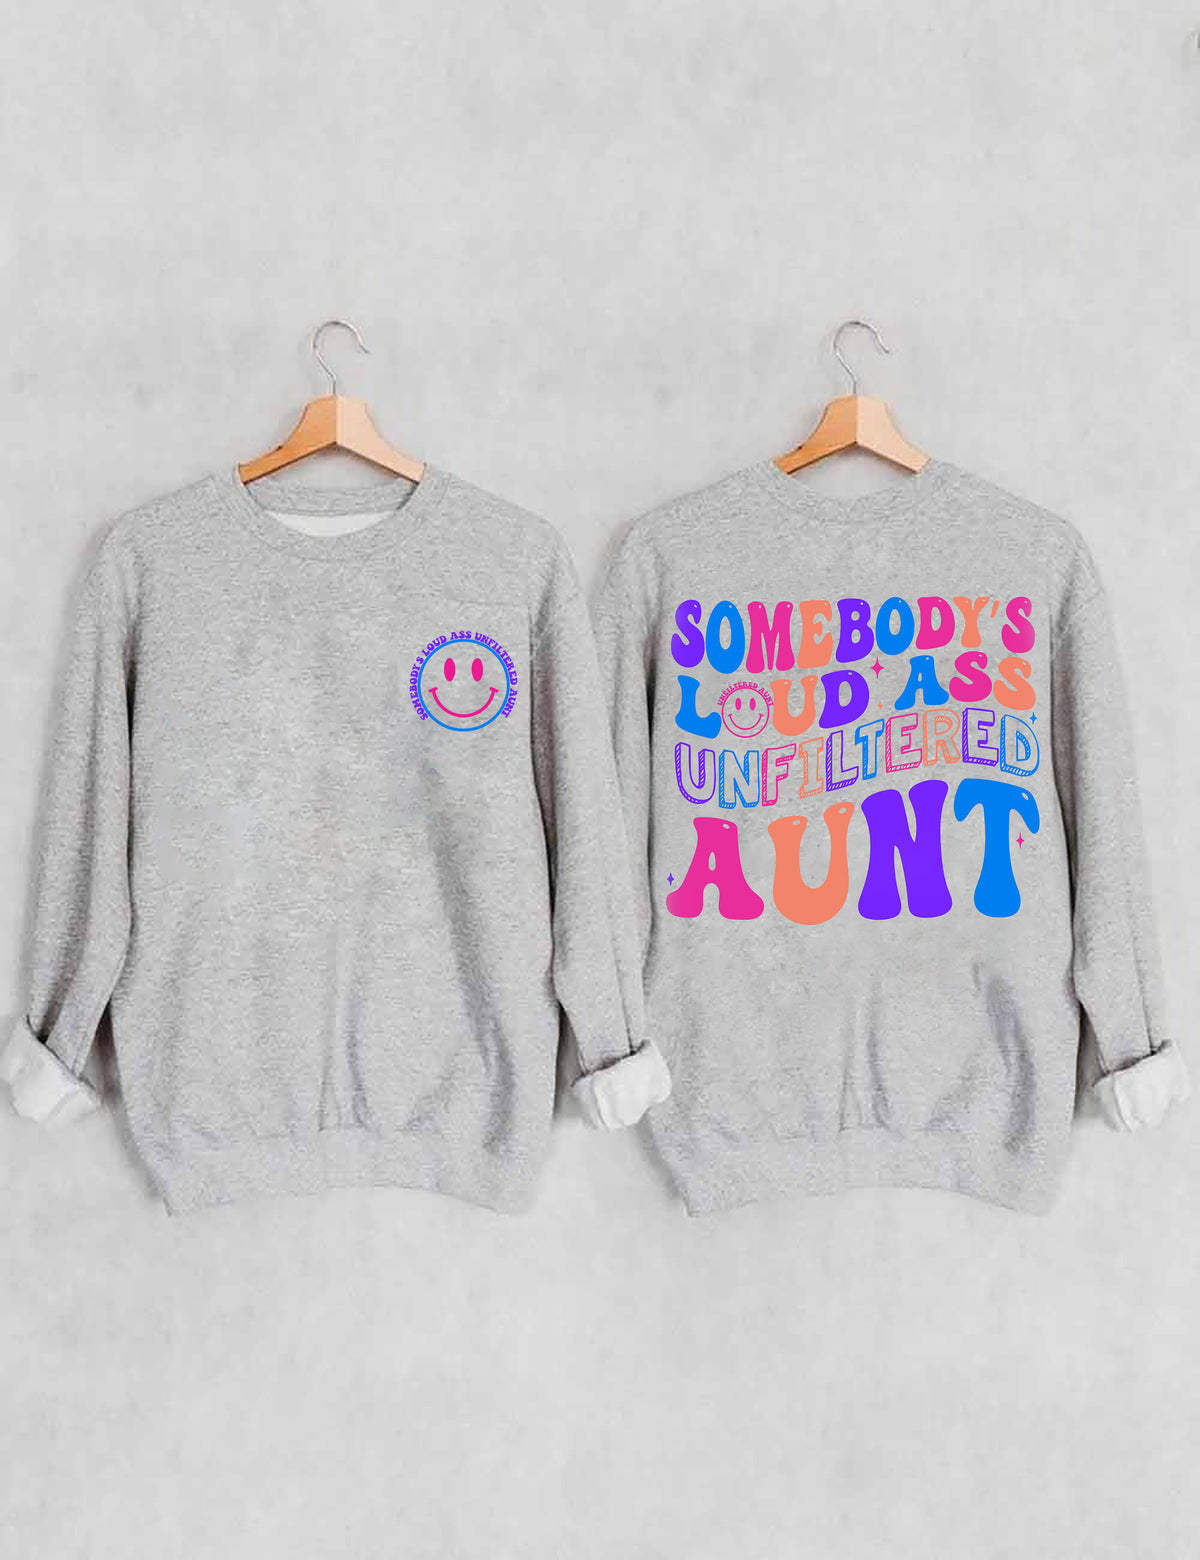 Somebody's Loud Ass Unfiltered Tante Sweatshirt 